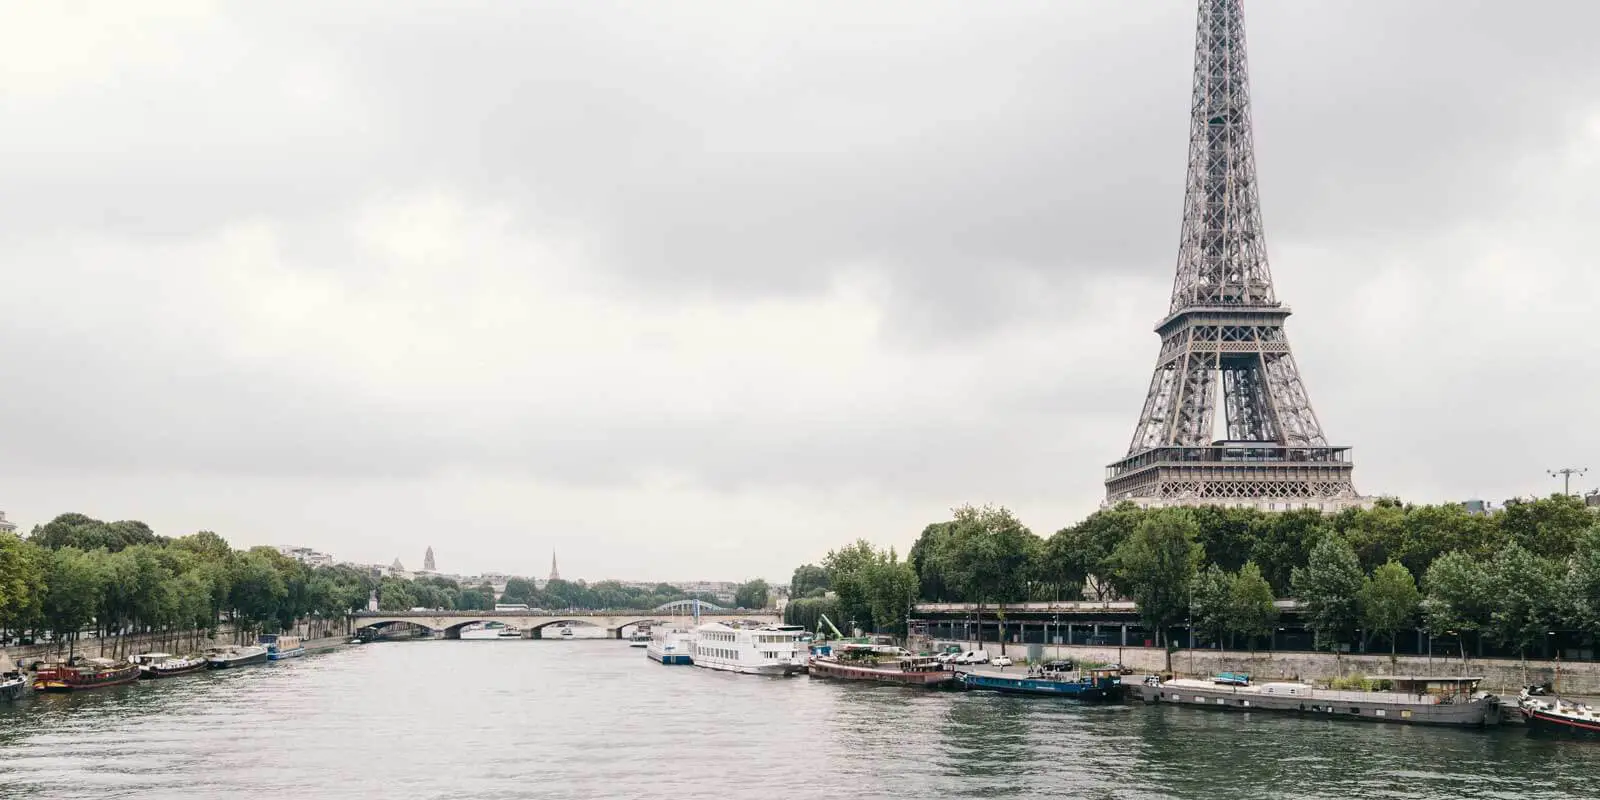 Landscape photo of the Seine River with the Eiffel Tower in the background on a gray, stormy day.